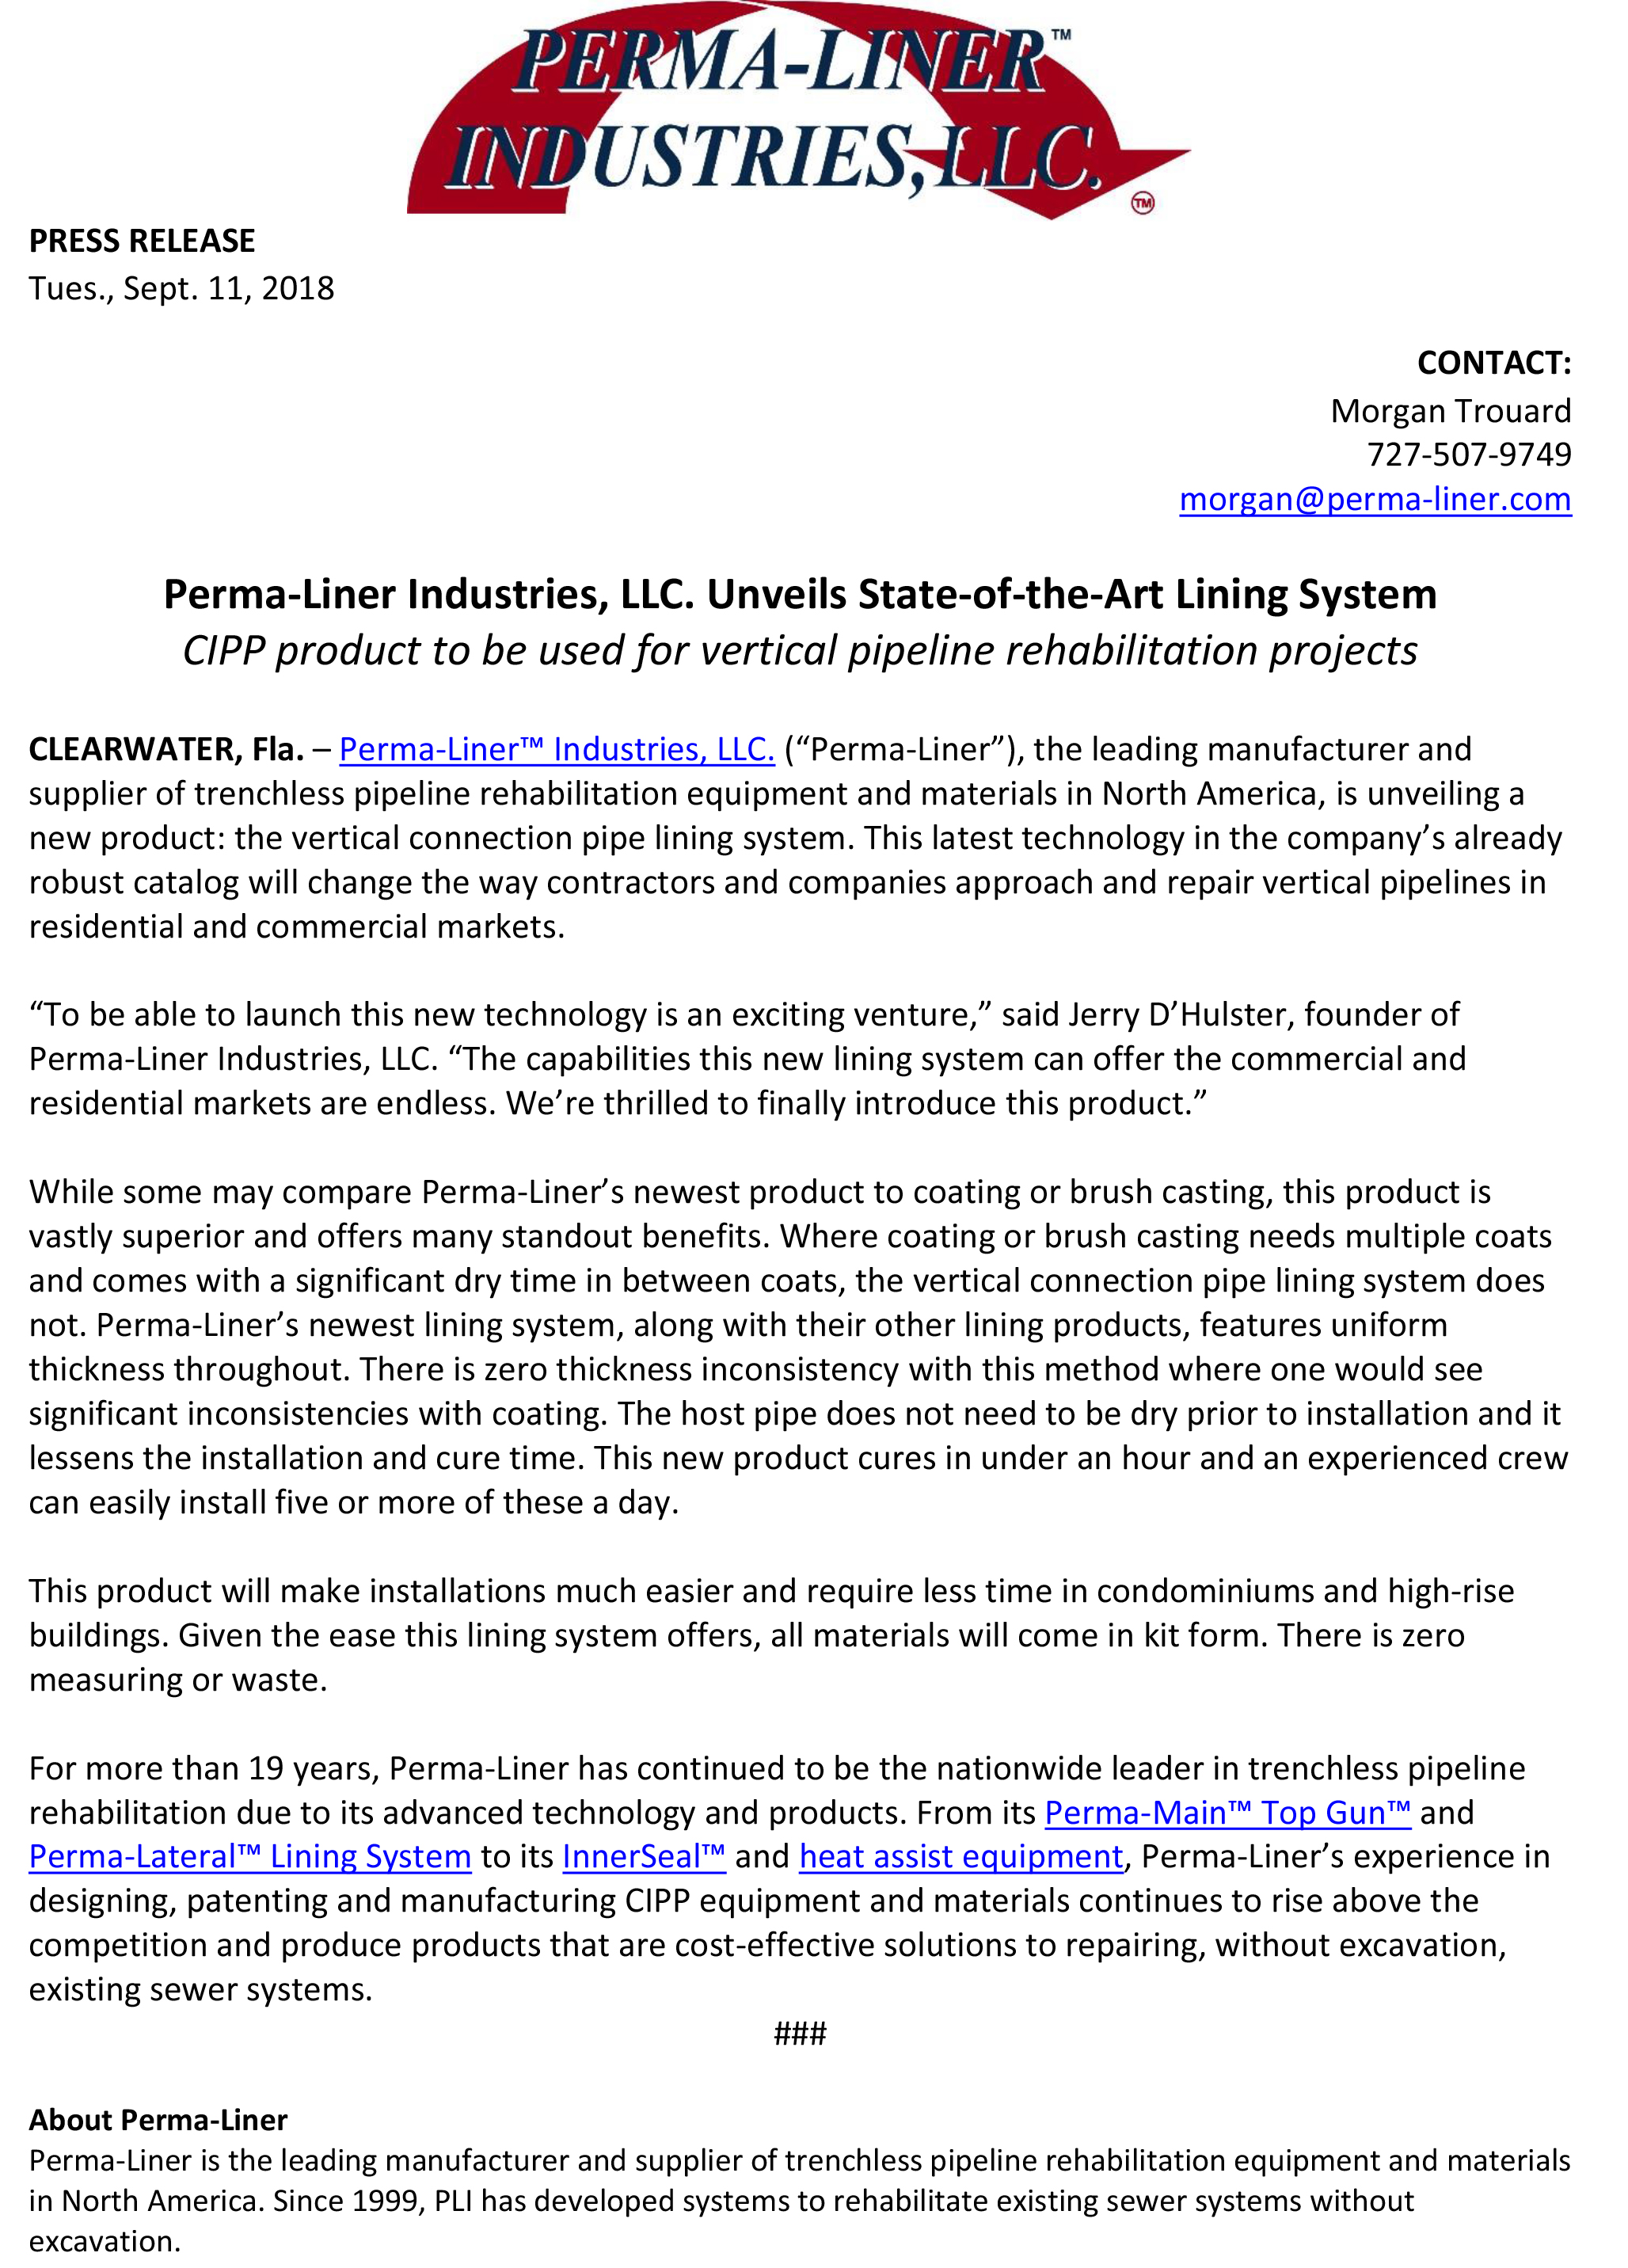 PERMA-LINER INDUSTRIES, LLC. UNVEILS STATE-OF-THE-ART LINING SYSTEM